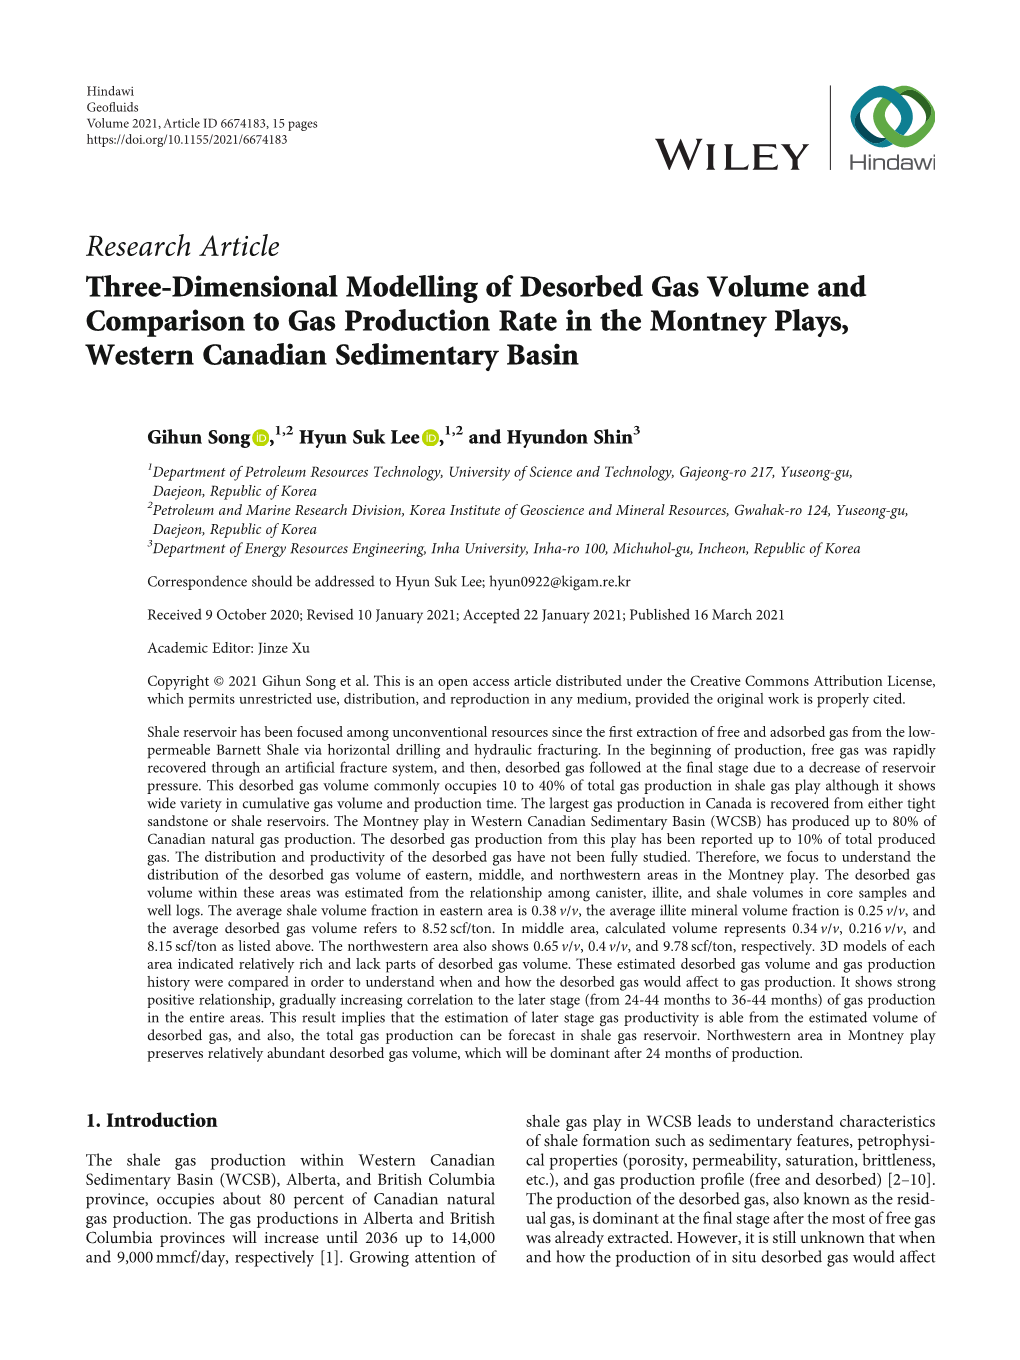 Three-Dimensional Modelling of Desorbed Gas Volume and Comparison to Gas Production Rate in the Montney Plays, Western Canadian Sedimentary Basin